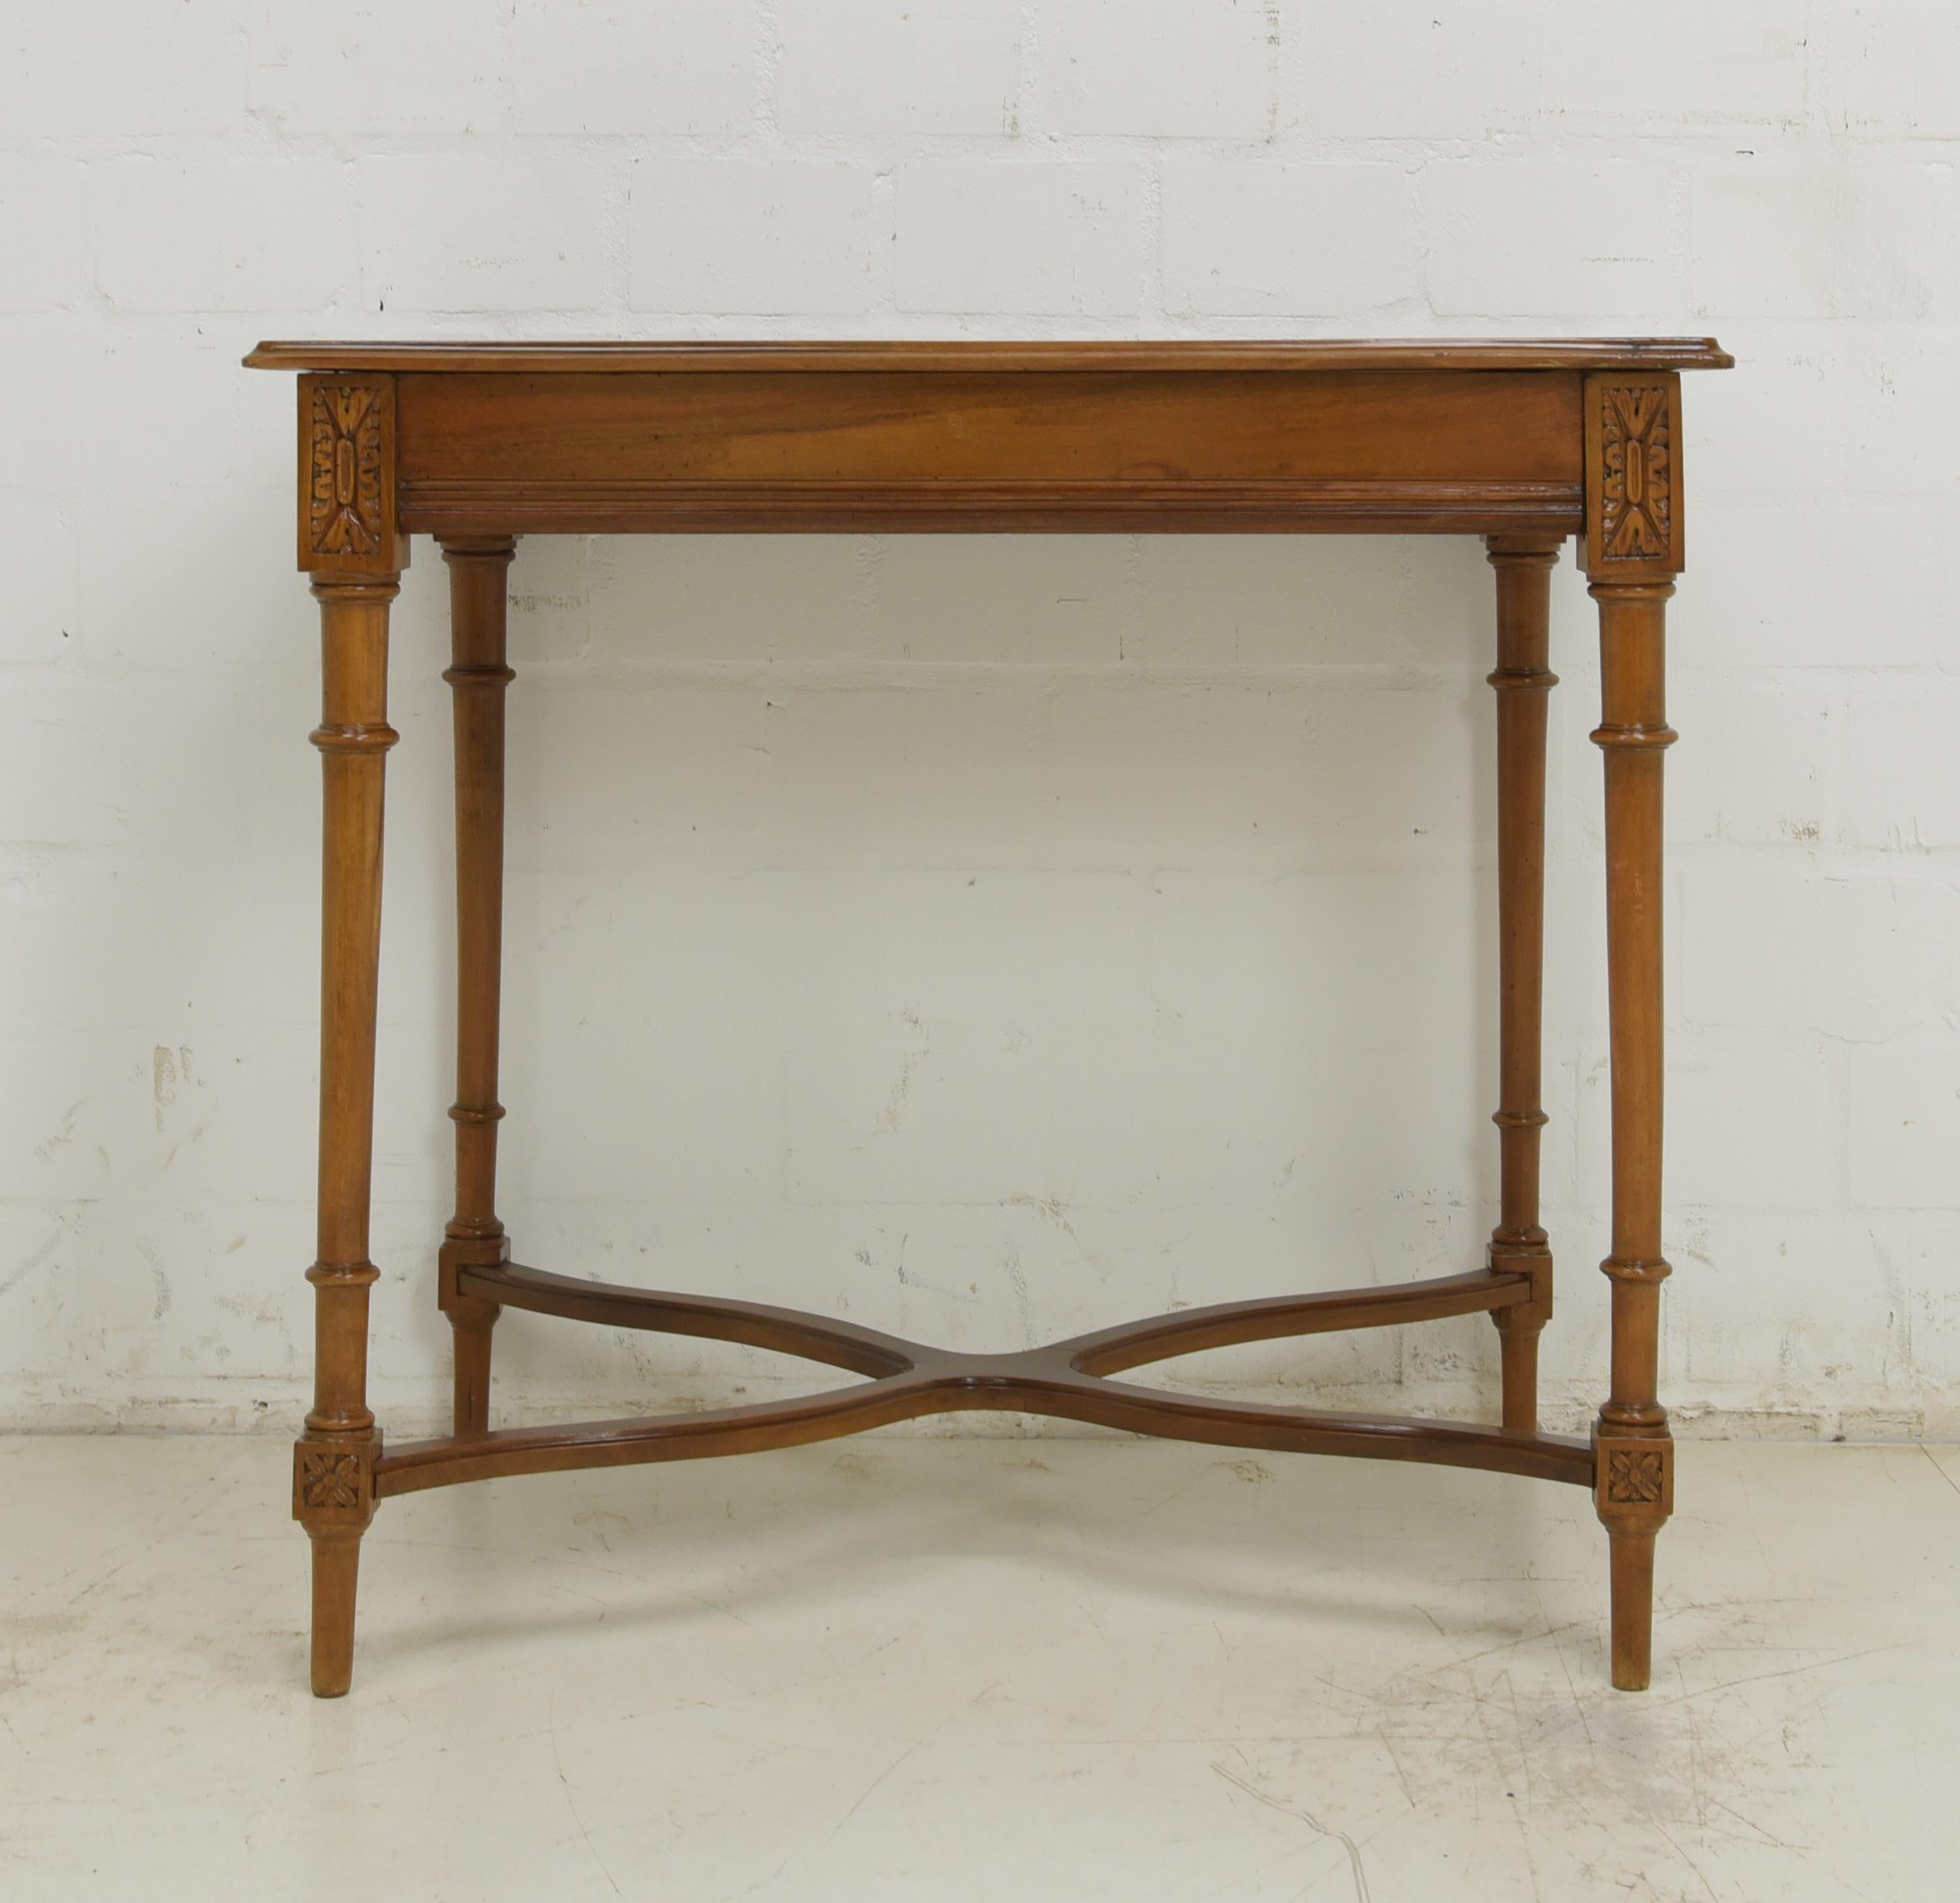 Salon table restored Wilhelminian period solid walnut side table

Features:
High quality
Beautiful grain

Additional information:
Material: Completely solid walnut
Dimensions: 84.5 W x 59 D x 77.5 H cm
Condition: Good.